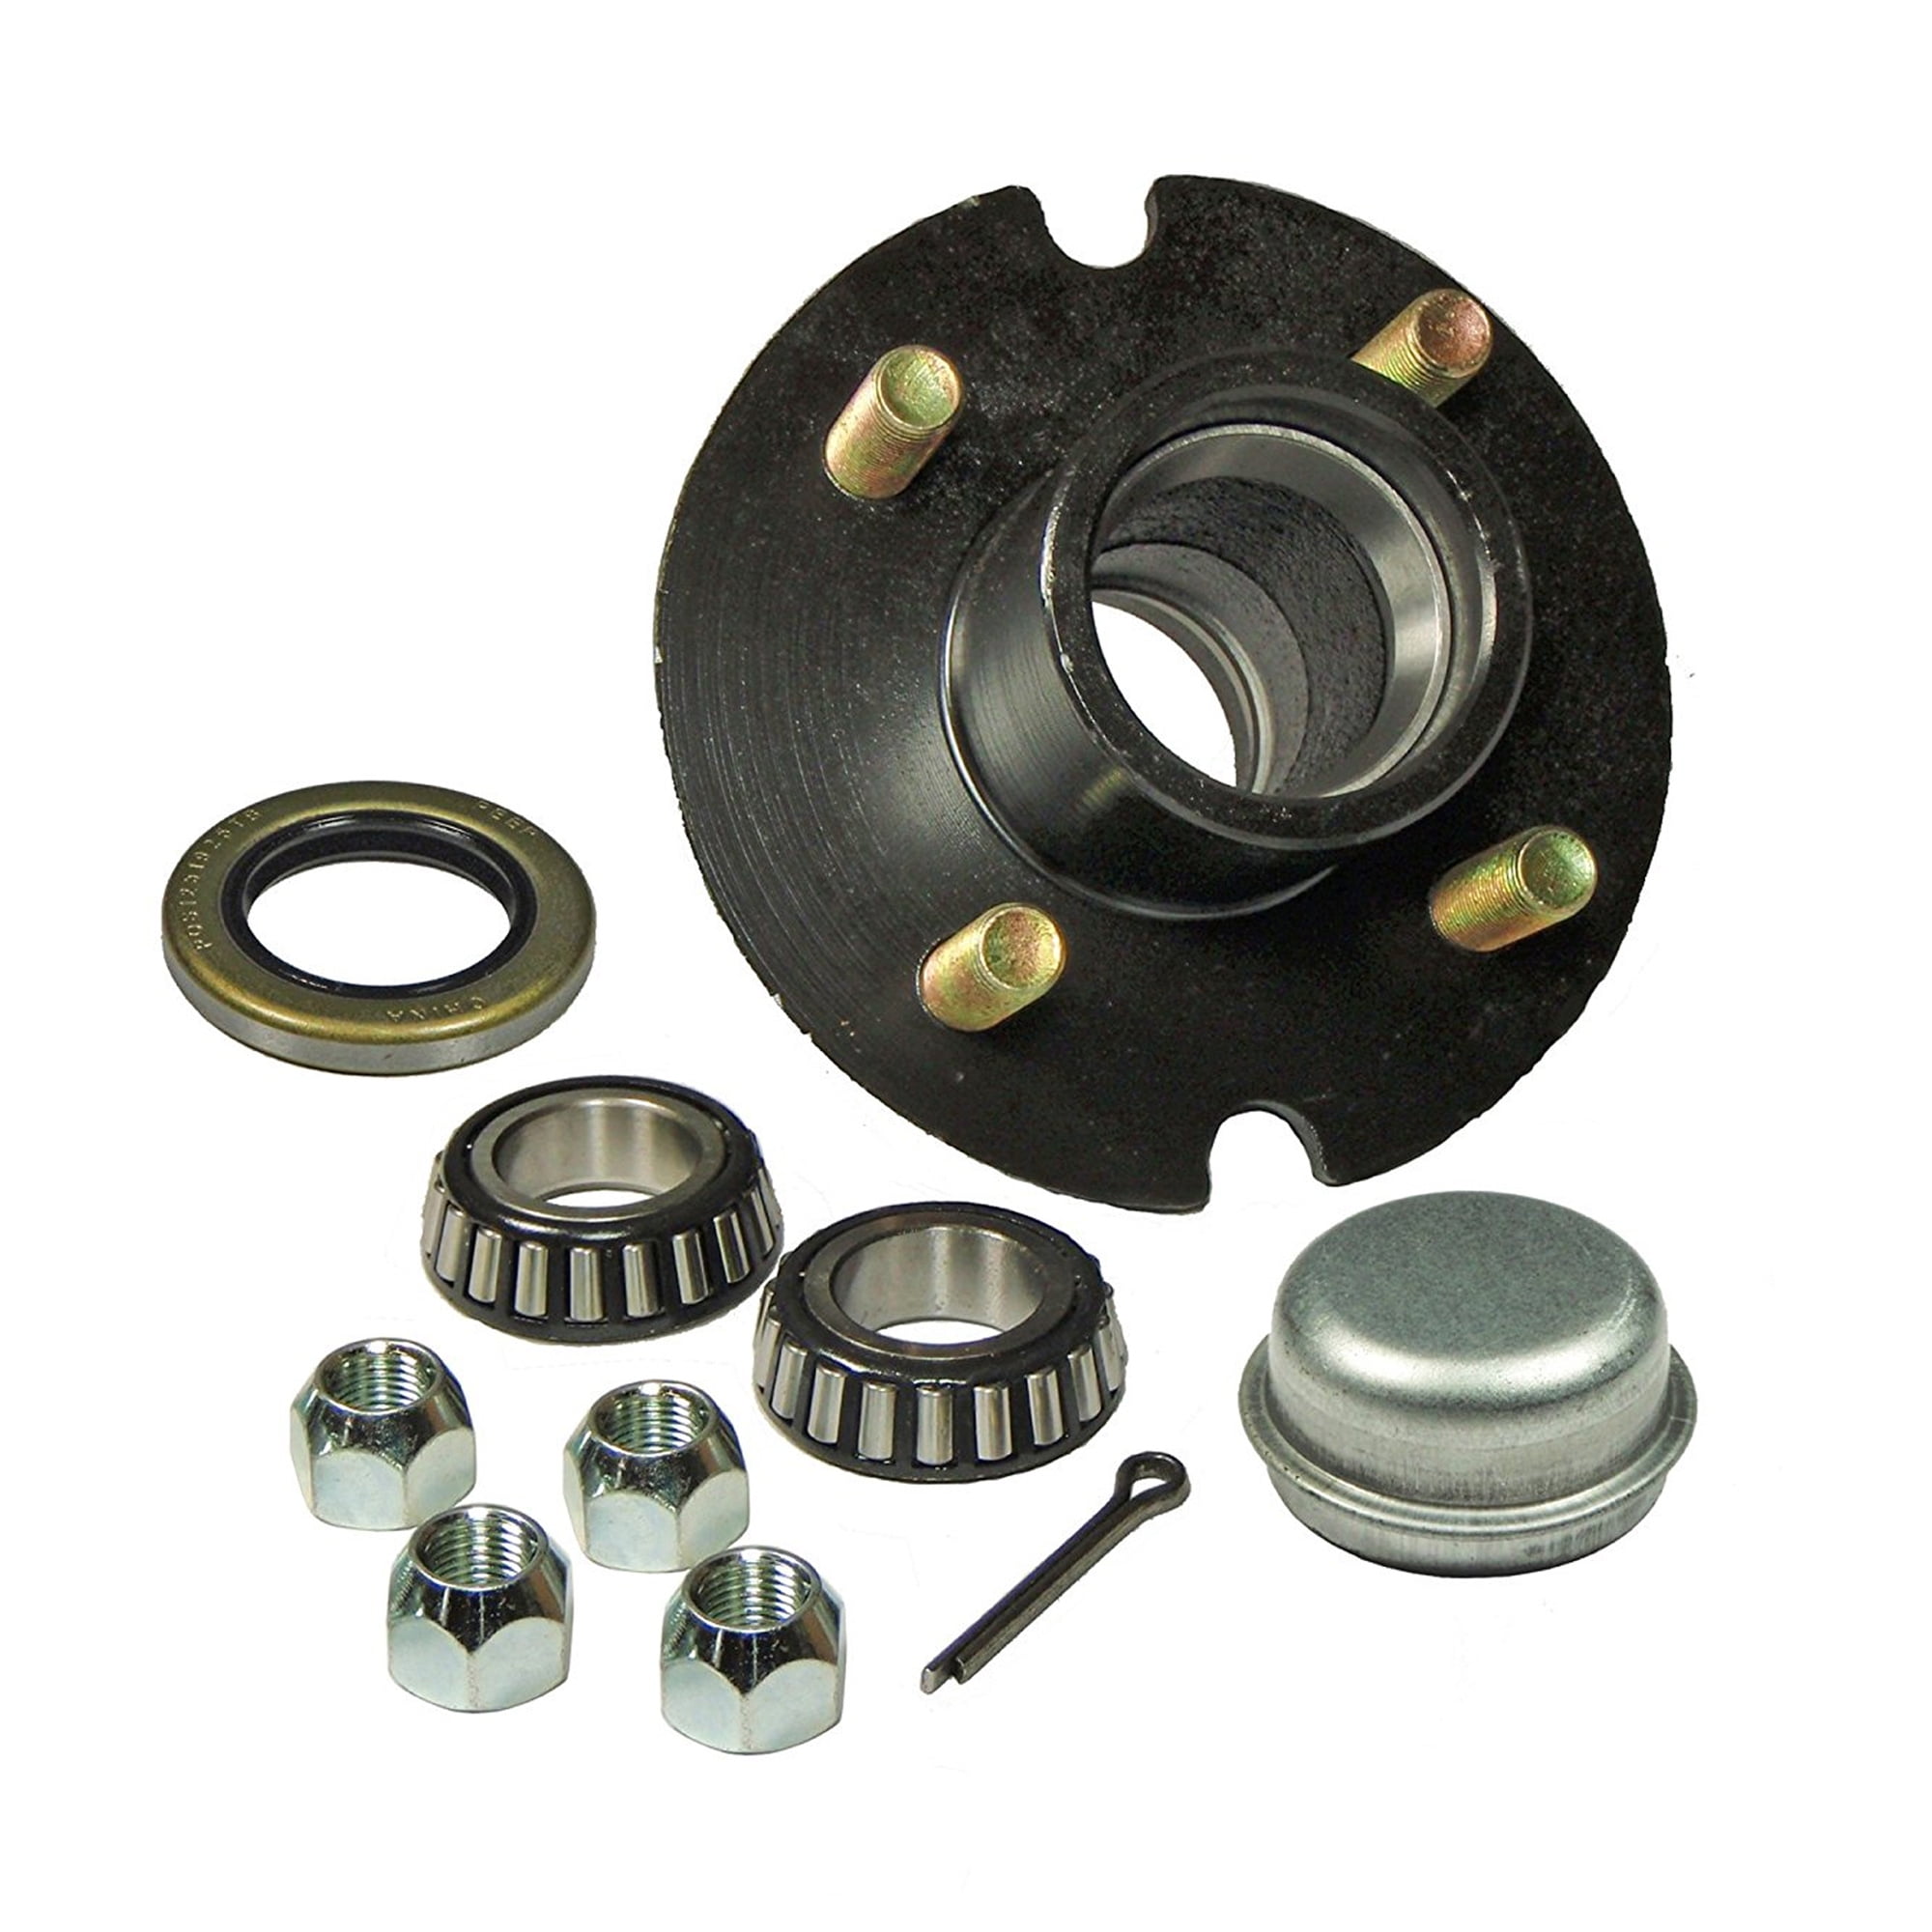 OWLAUTO 4-Bolt on 4-inch Circle Trailer Hub Kit with 1 inch ID Bearings 